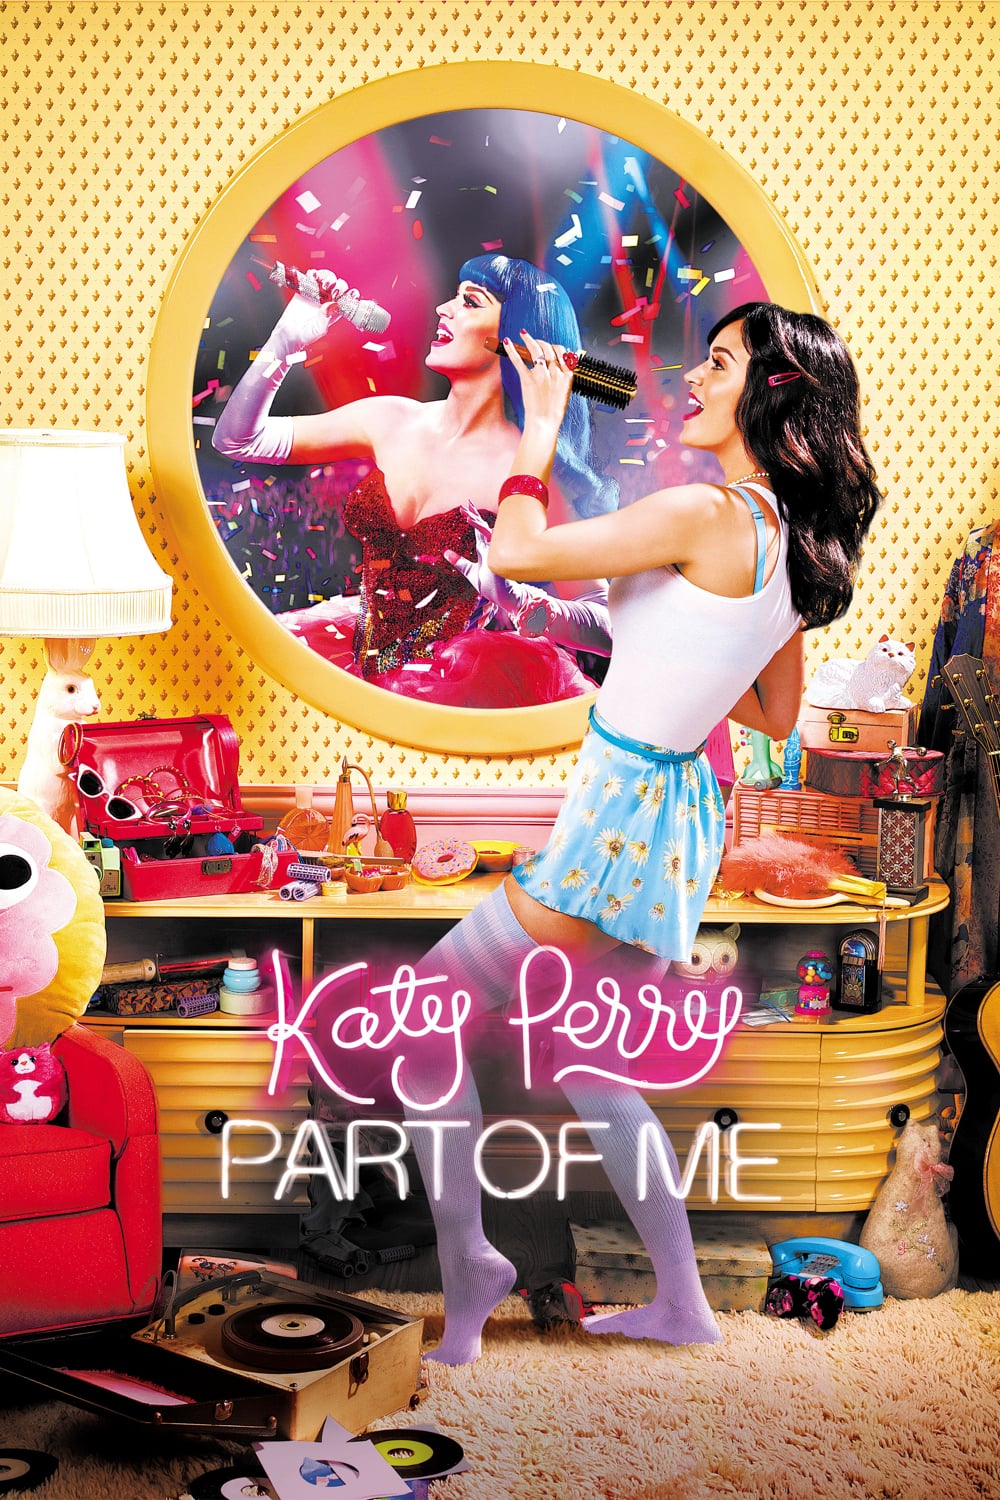 Katy Perry - Katy Perry the Movie: Part of Me - Reviews - Album of The Year